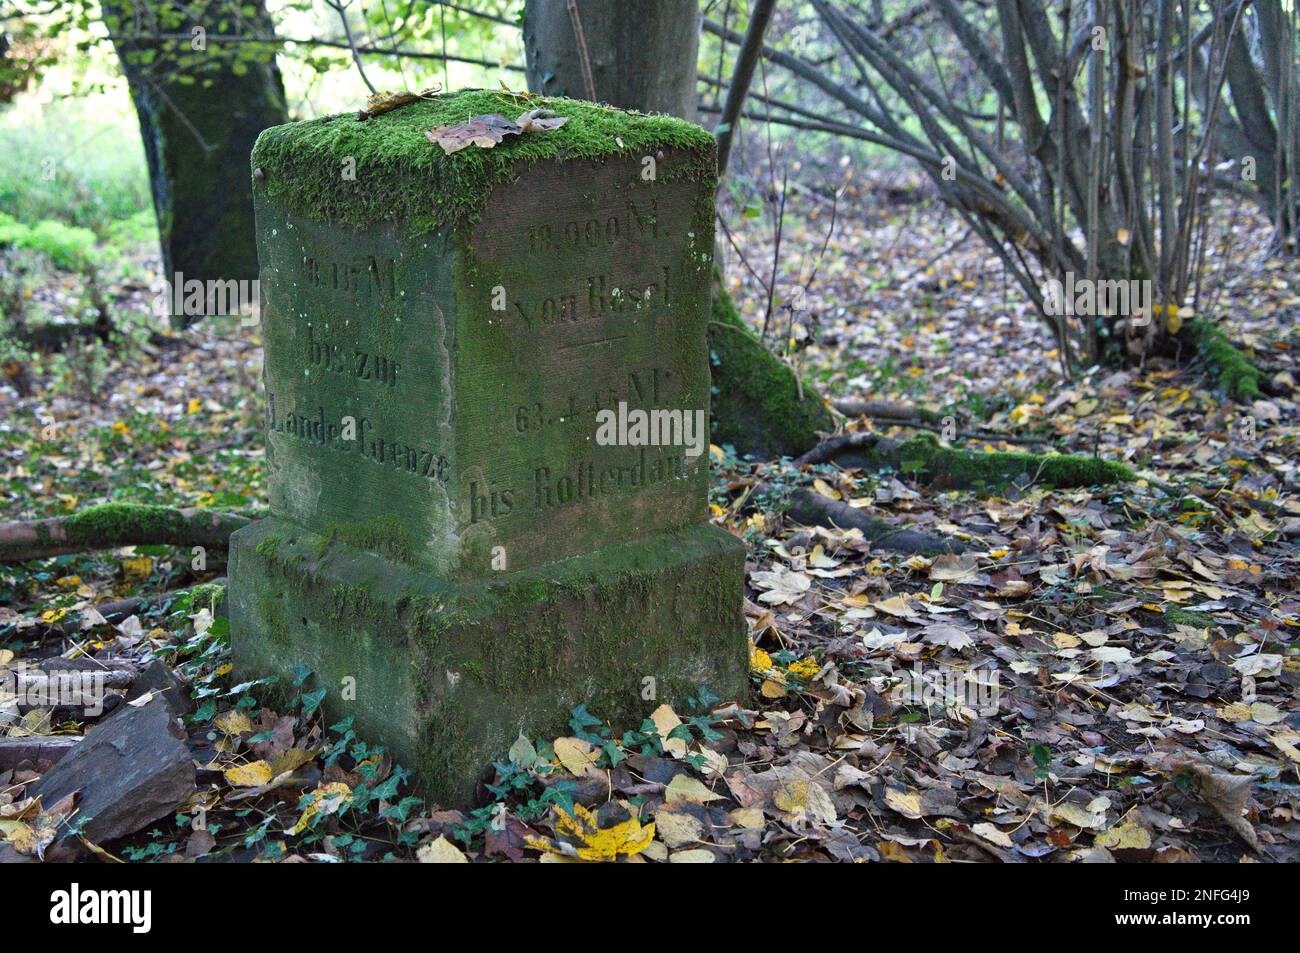 Close-up of the old Rhine measurment stone Myriameterstein in the alluvial forest near Hagenbach Stock Photo